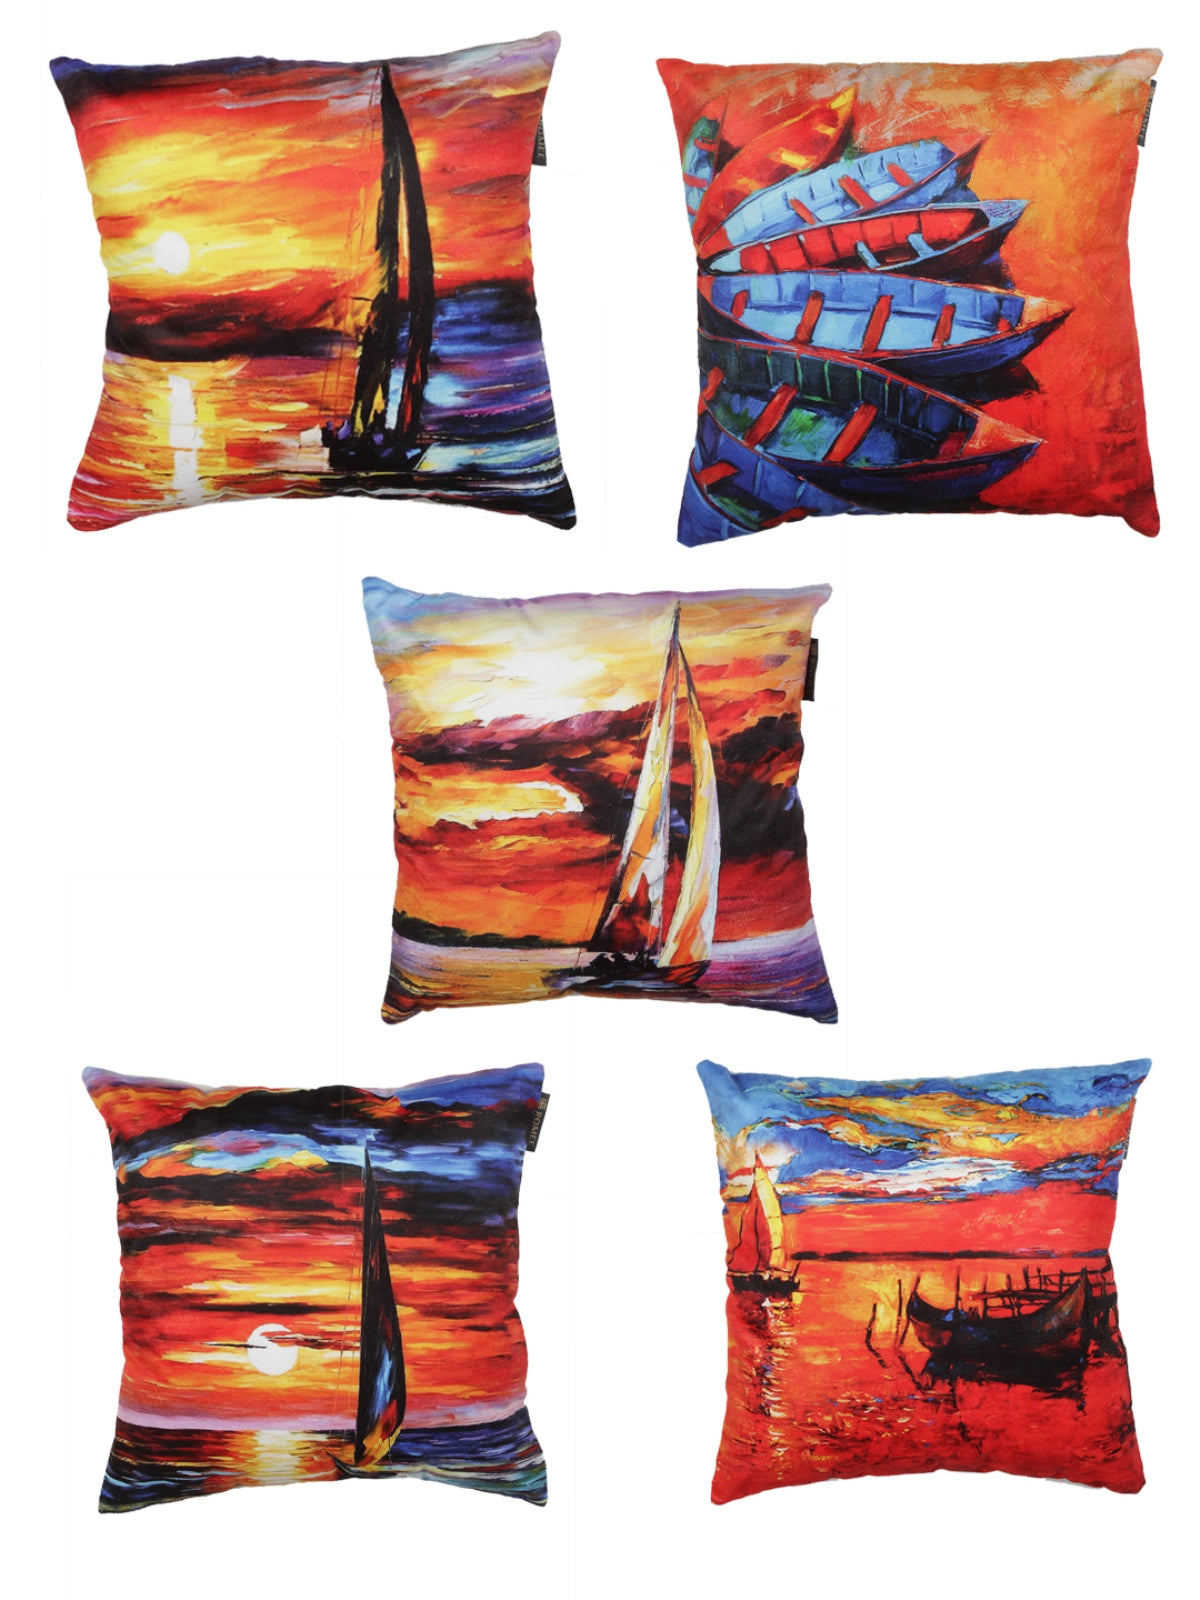 Polyester Velvet Fabric 3D Printed Cushion Cover 16x16 Set of 5 - Multicolor